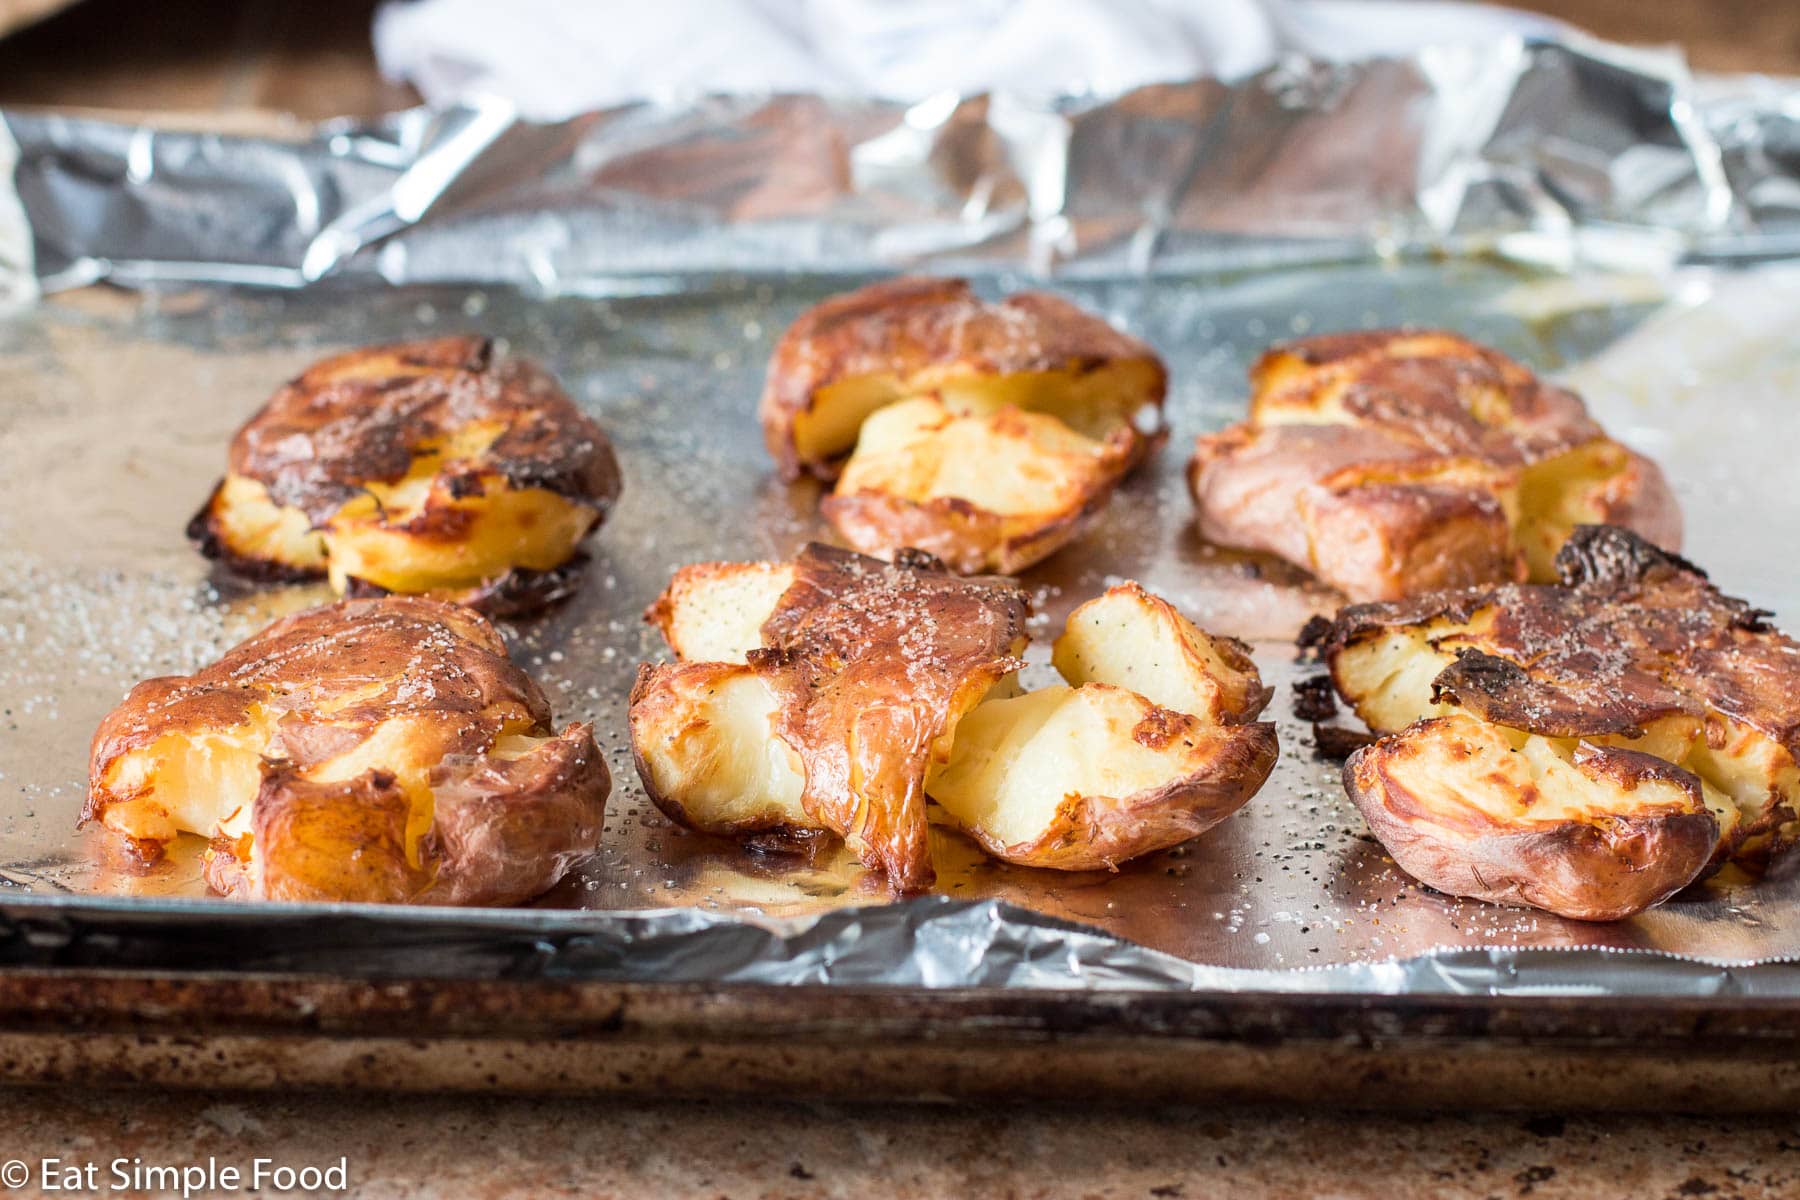 6 crispy smashed (flattened) potatoes on a sheet pan lined with aluminum foil